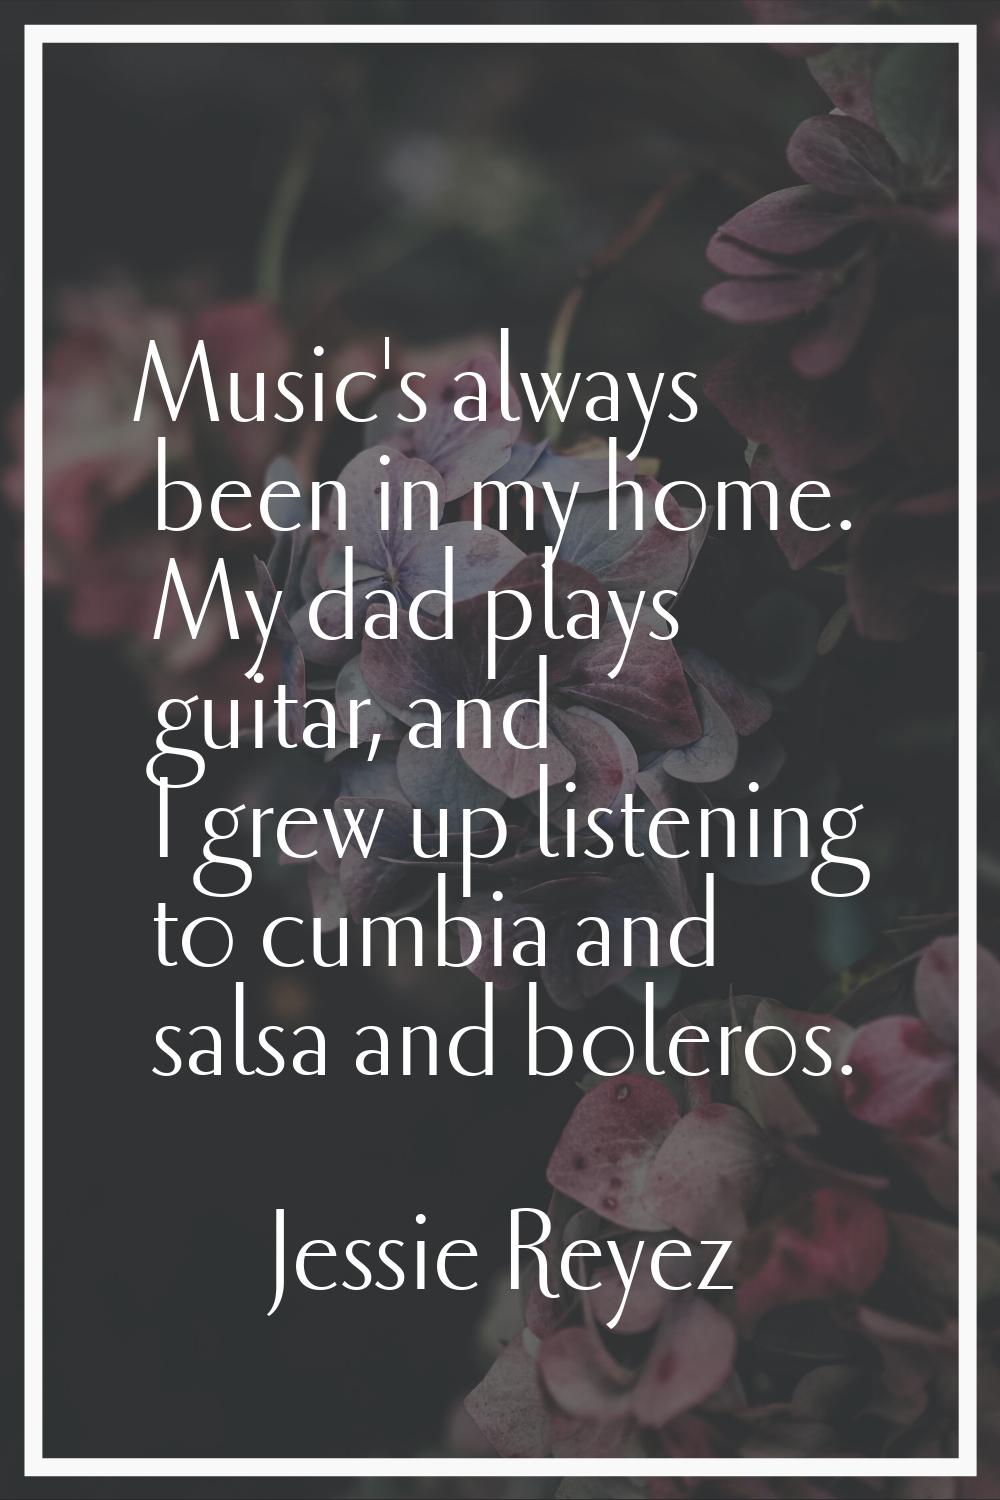 Music's always been in my home. My dad plays guitar, and I grew up listening to cumbia and salsa an